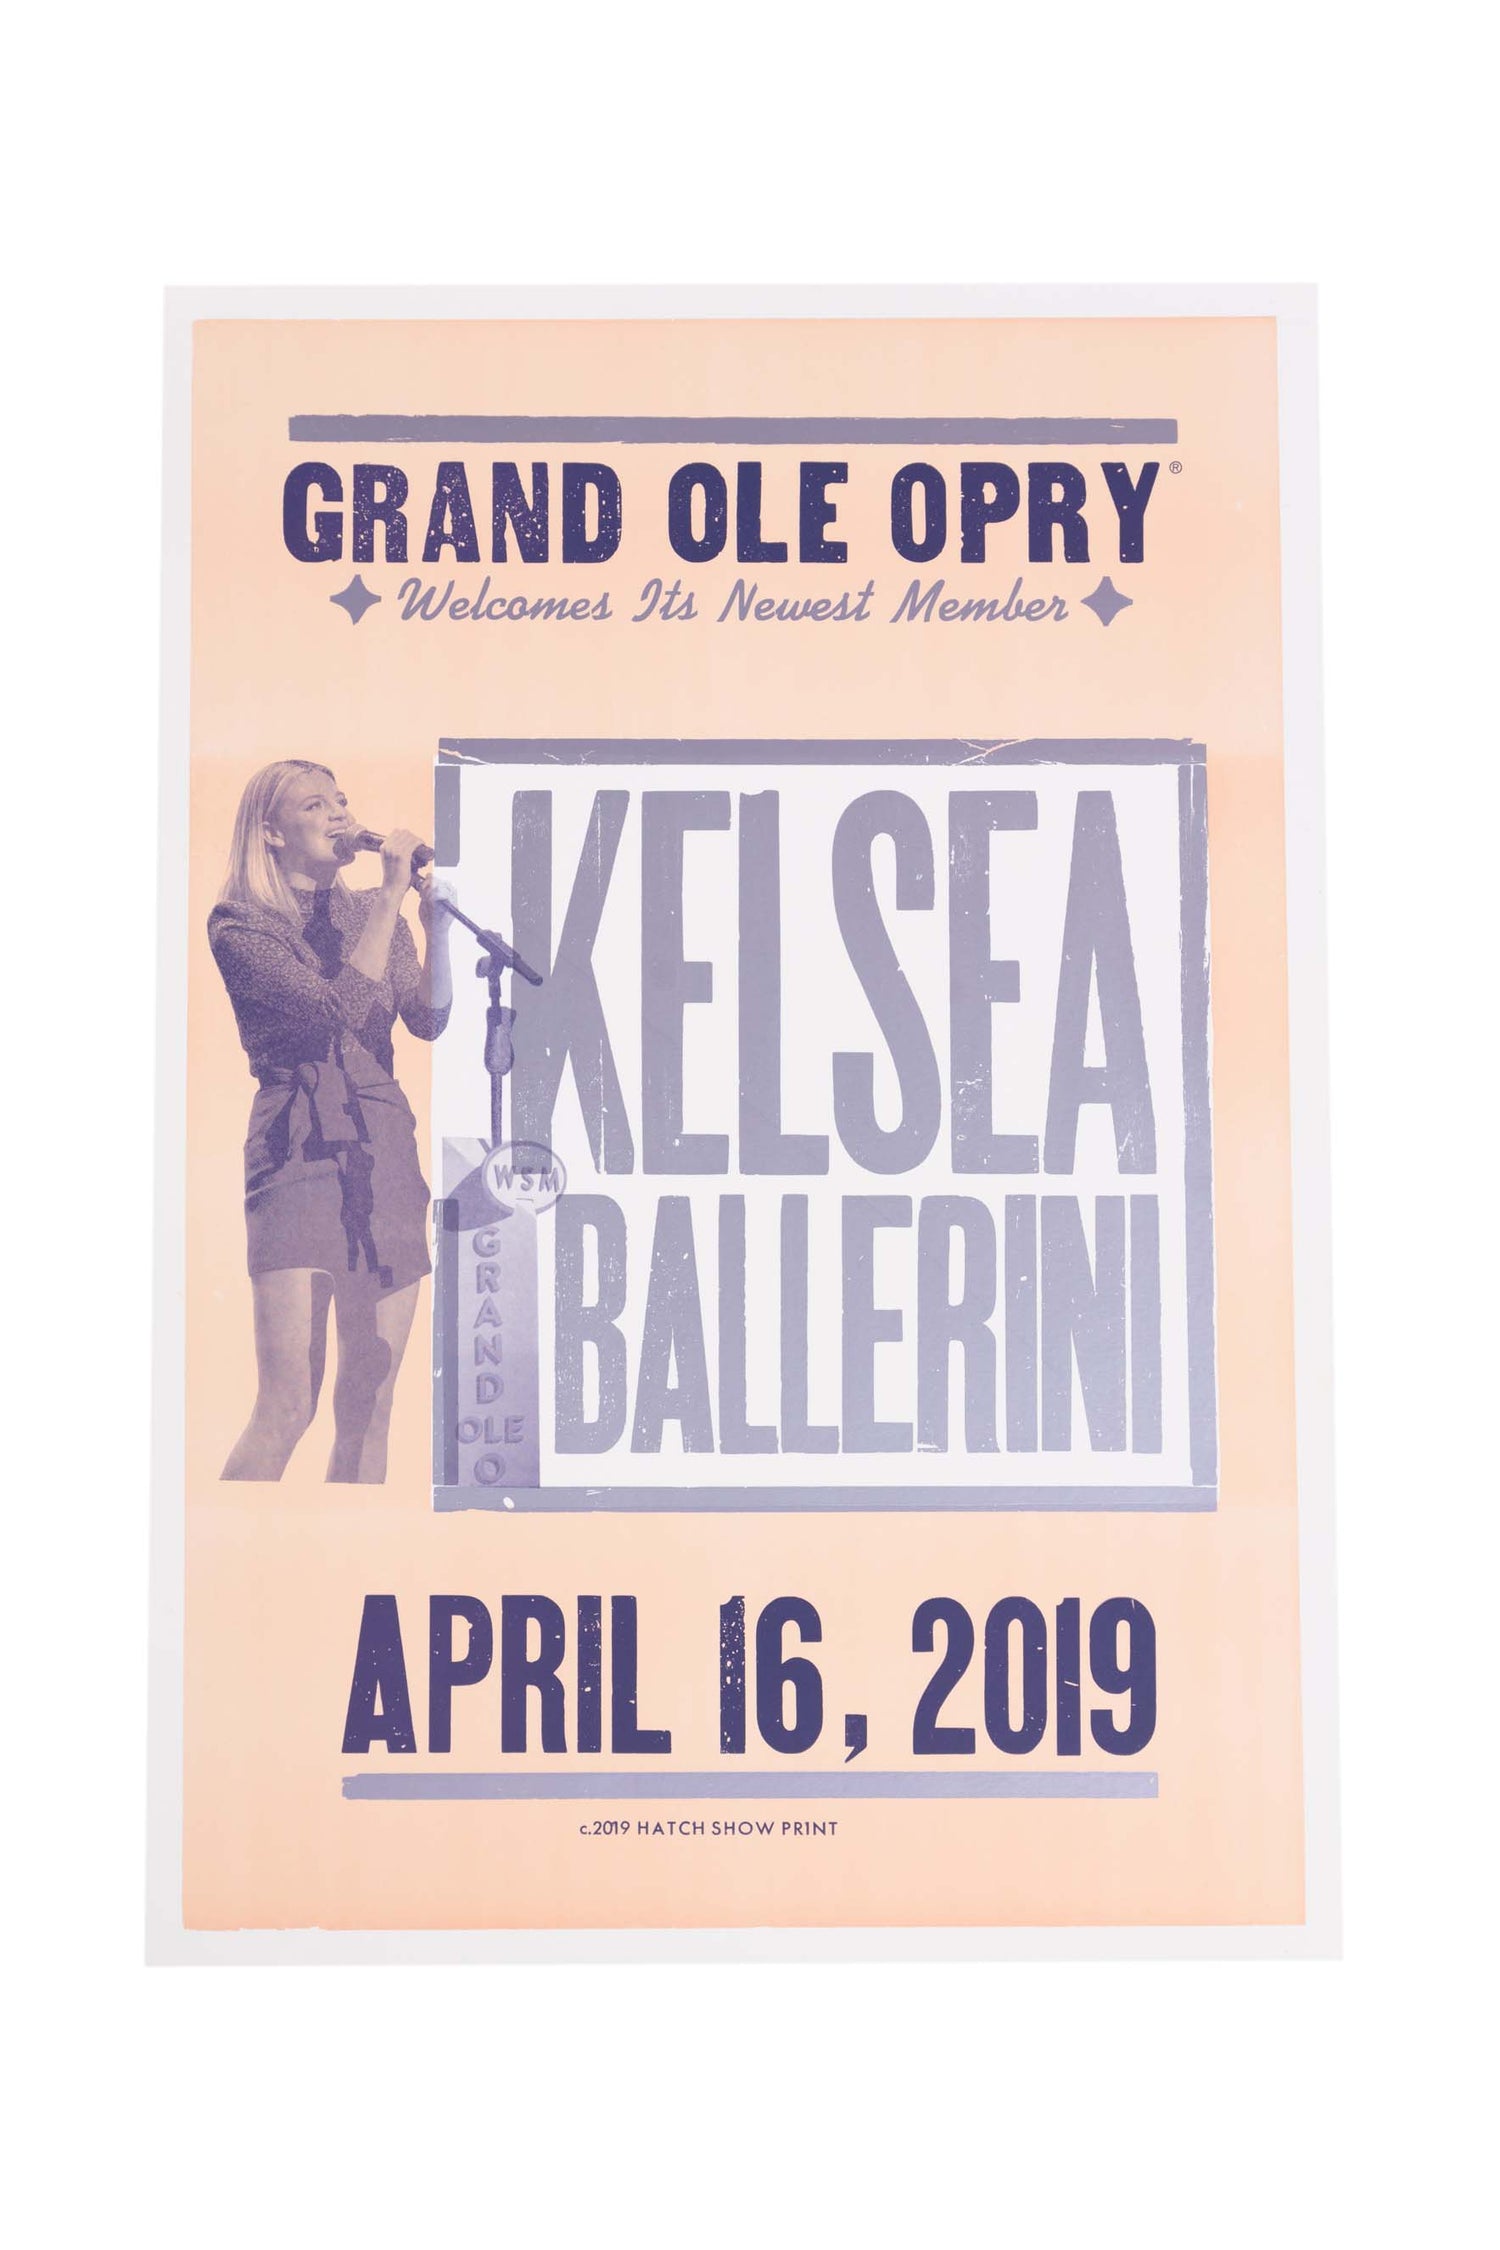 Kelsea Ballerini Official Opry Induction Hatch Show Print